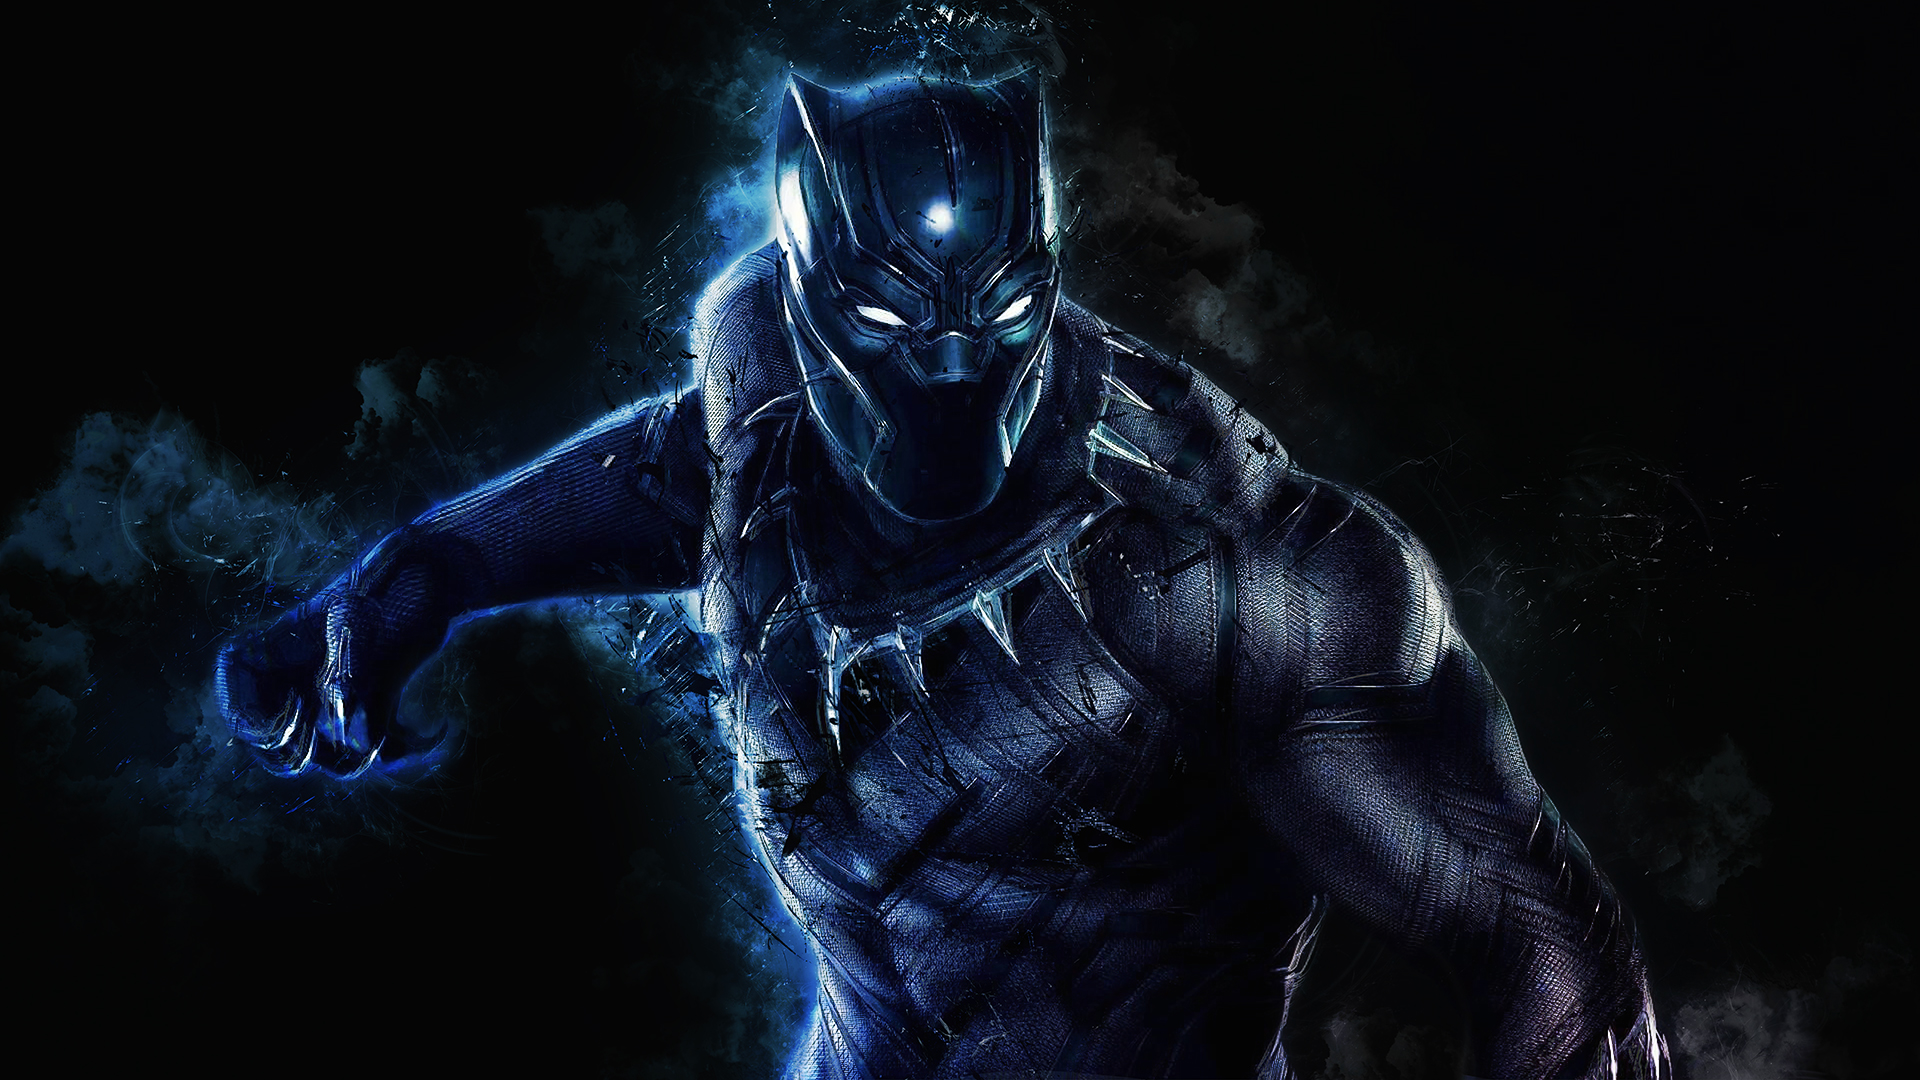 Wall.Cookdiary.net of Black Panther Wallpaper HD